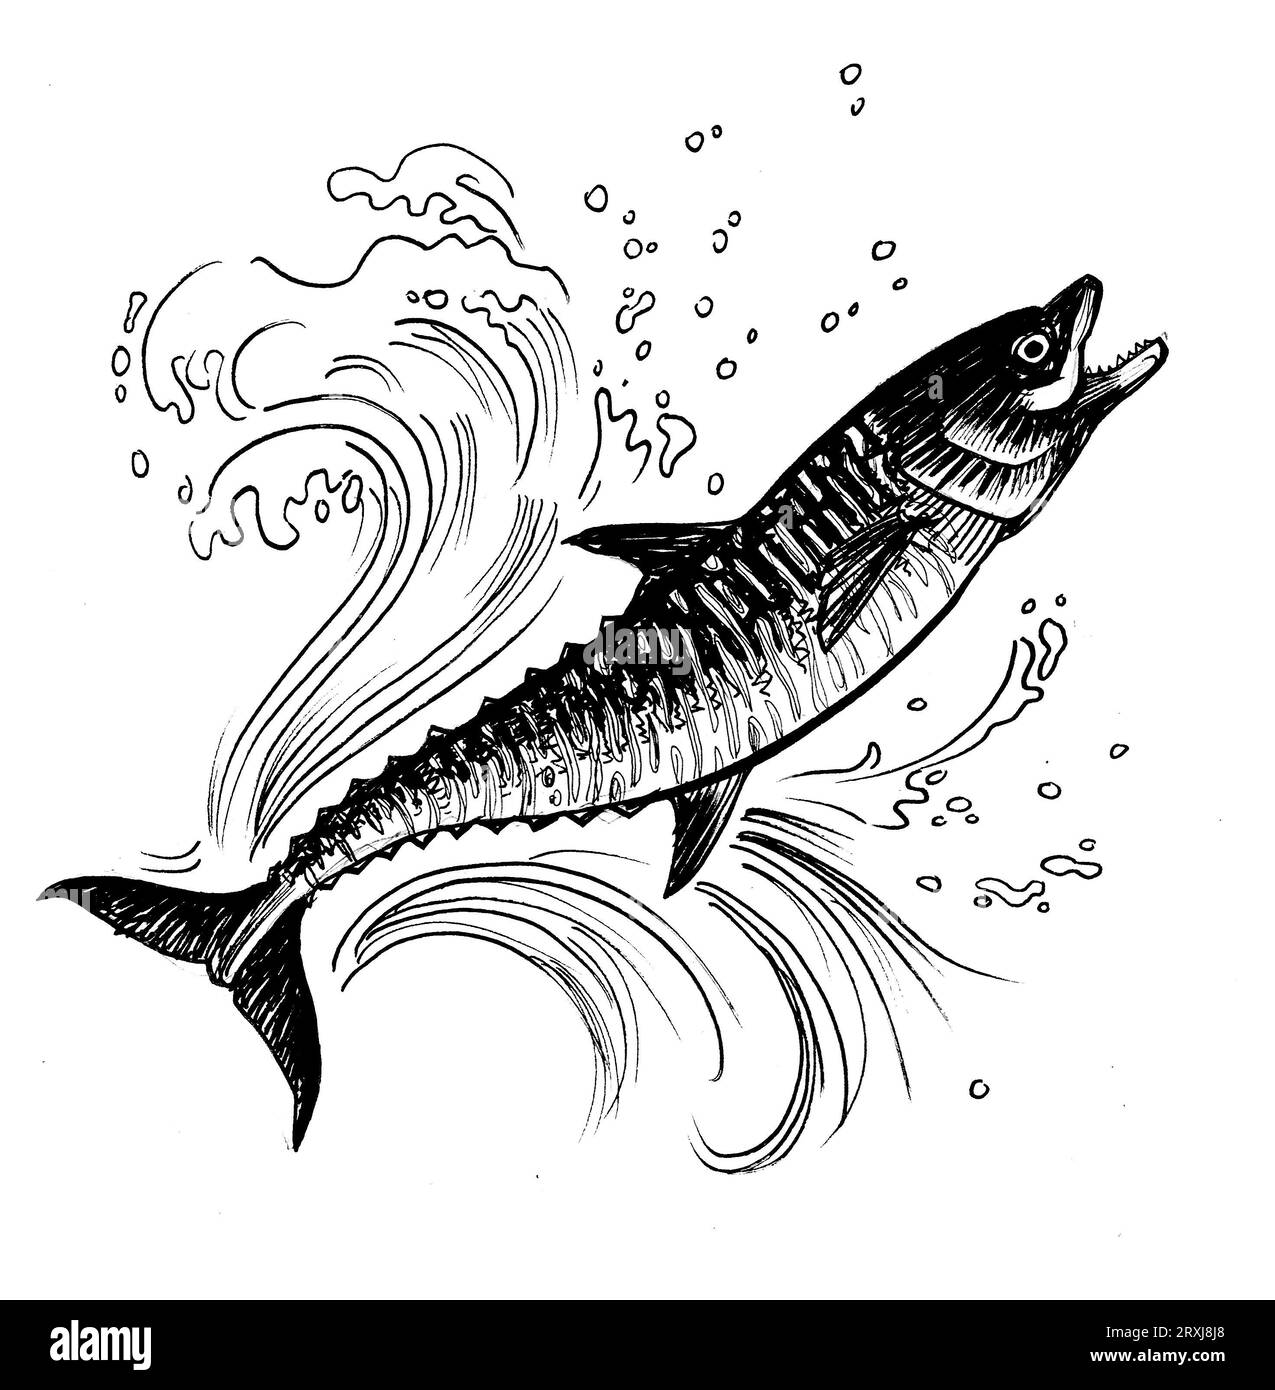 Jumping fish Black and White Stock Photos & Images - Alamy